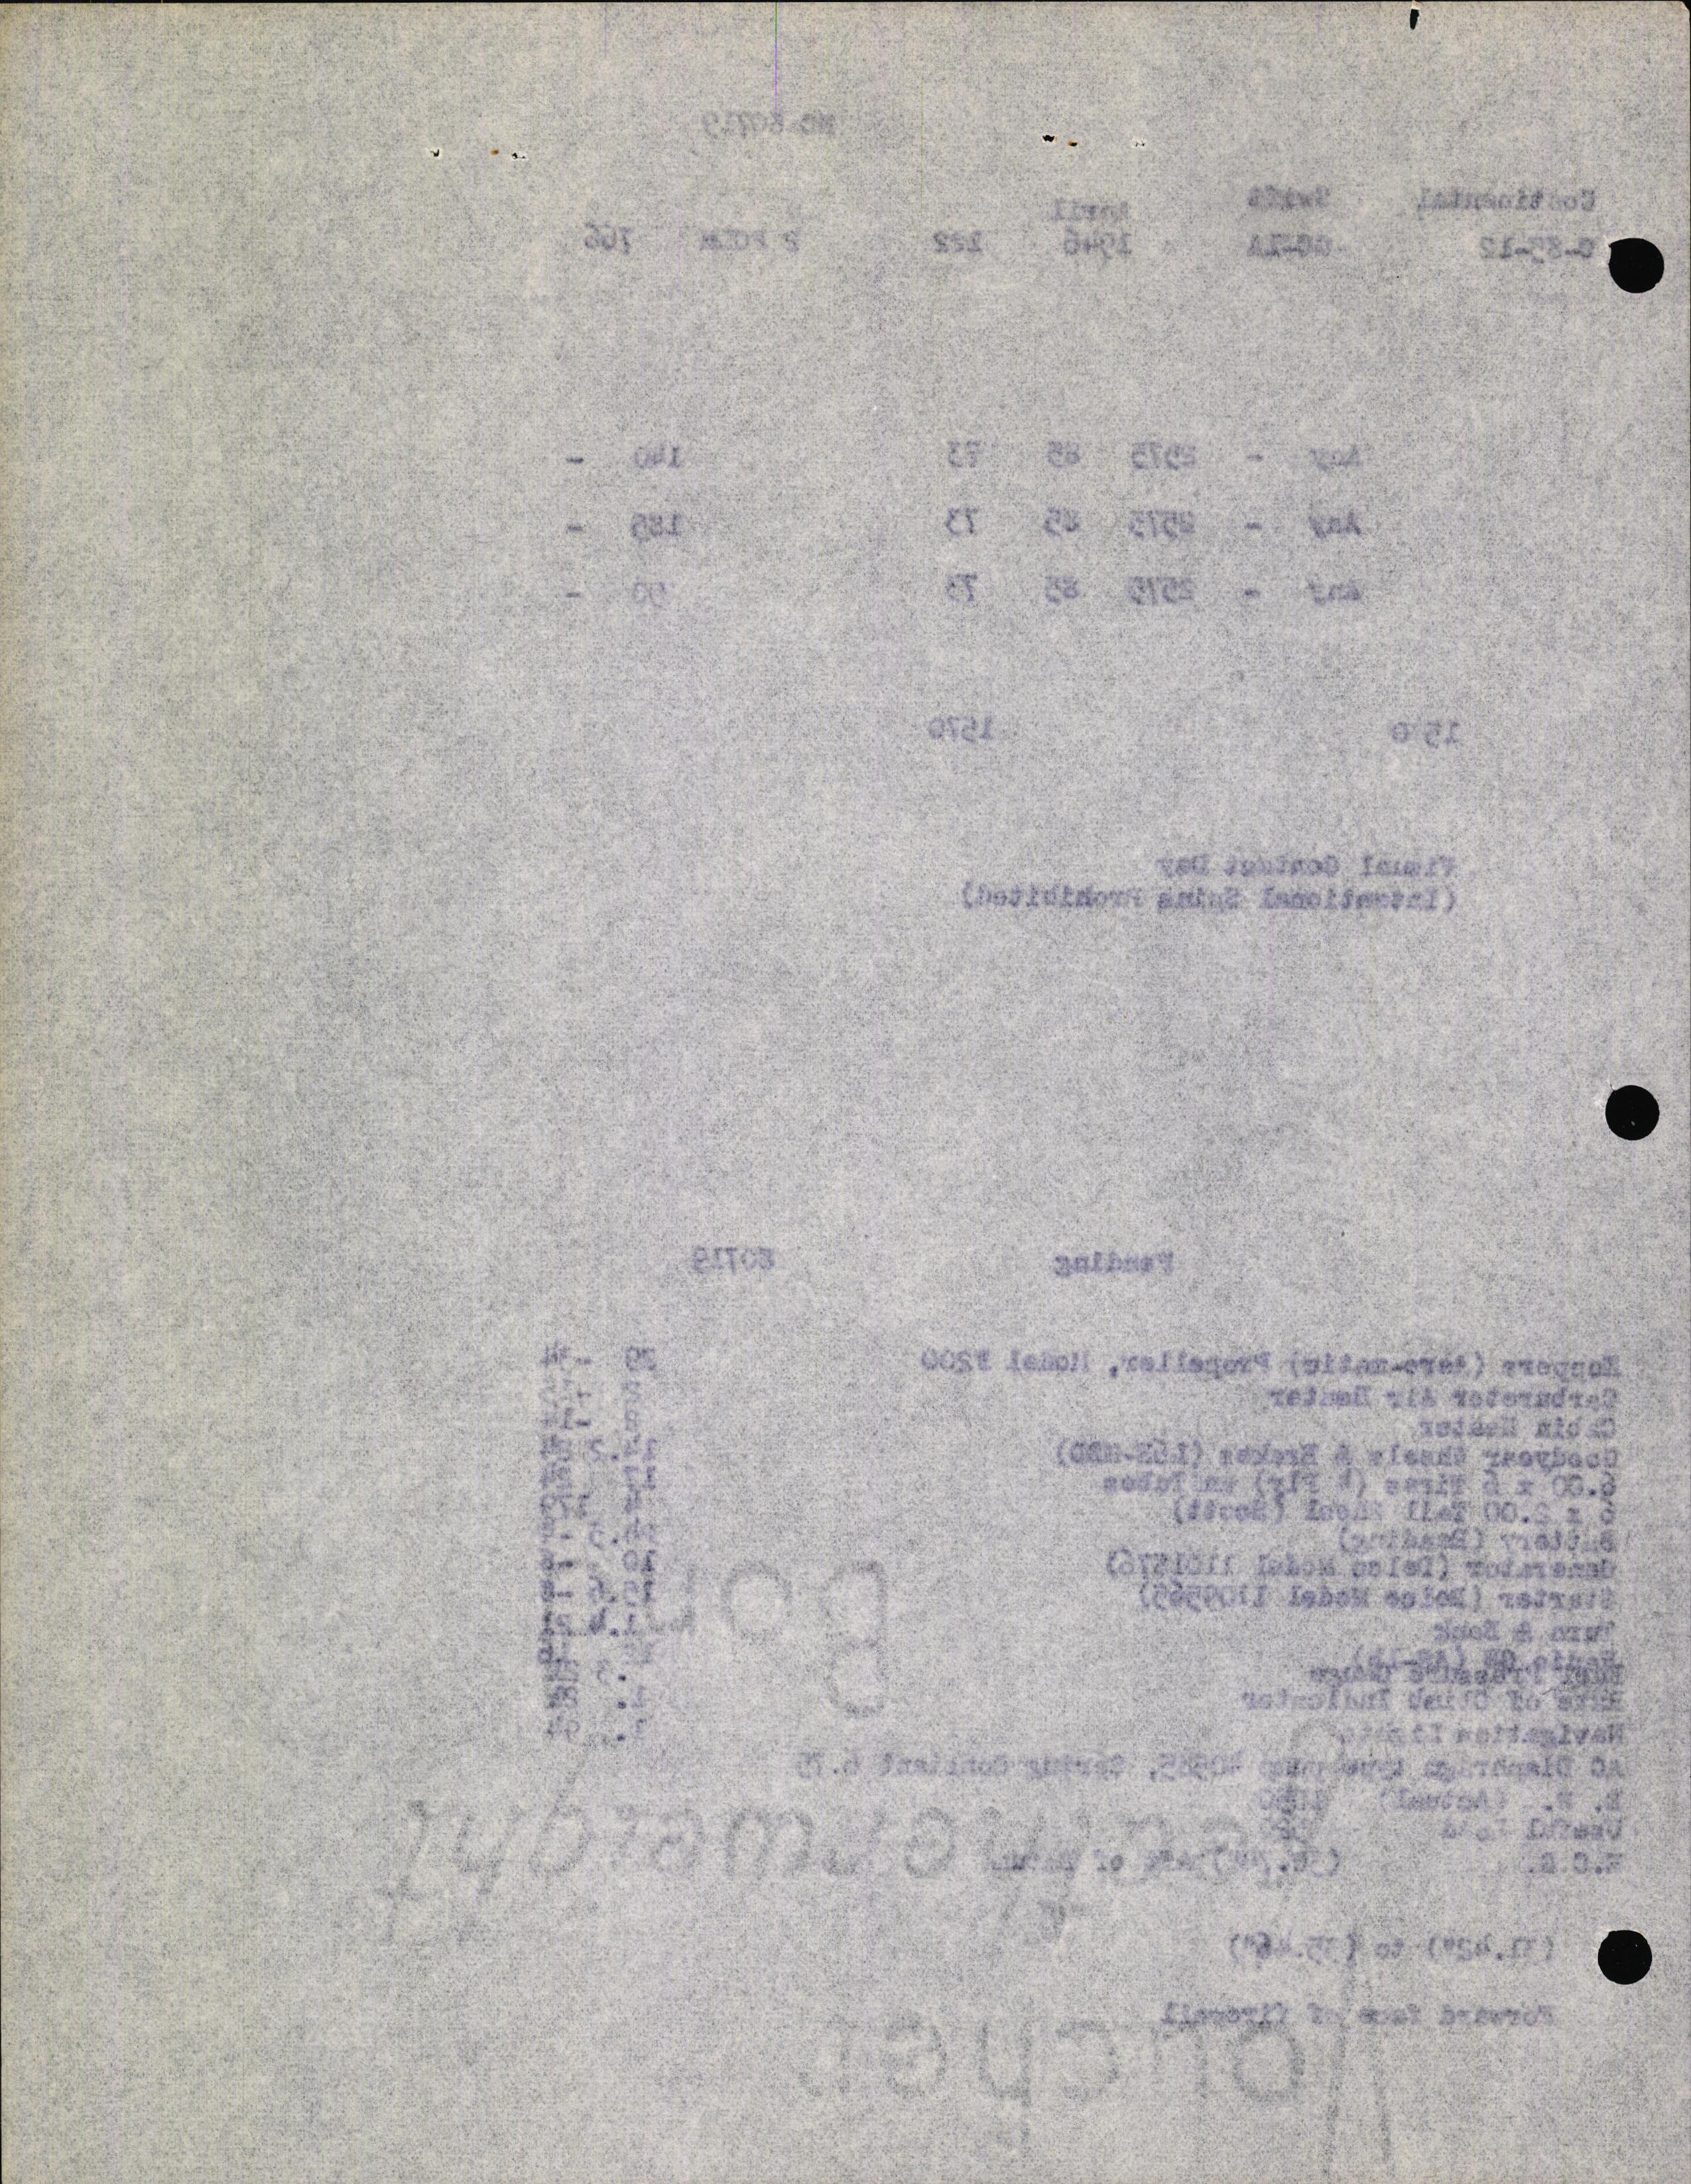 Sample page 6 from AirCorps Library document: Technical Information for Serial Number 122